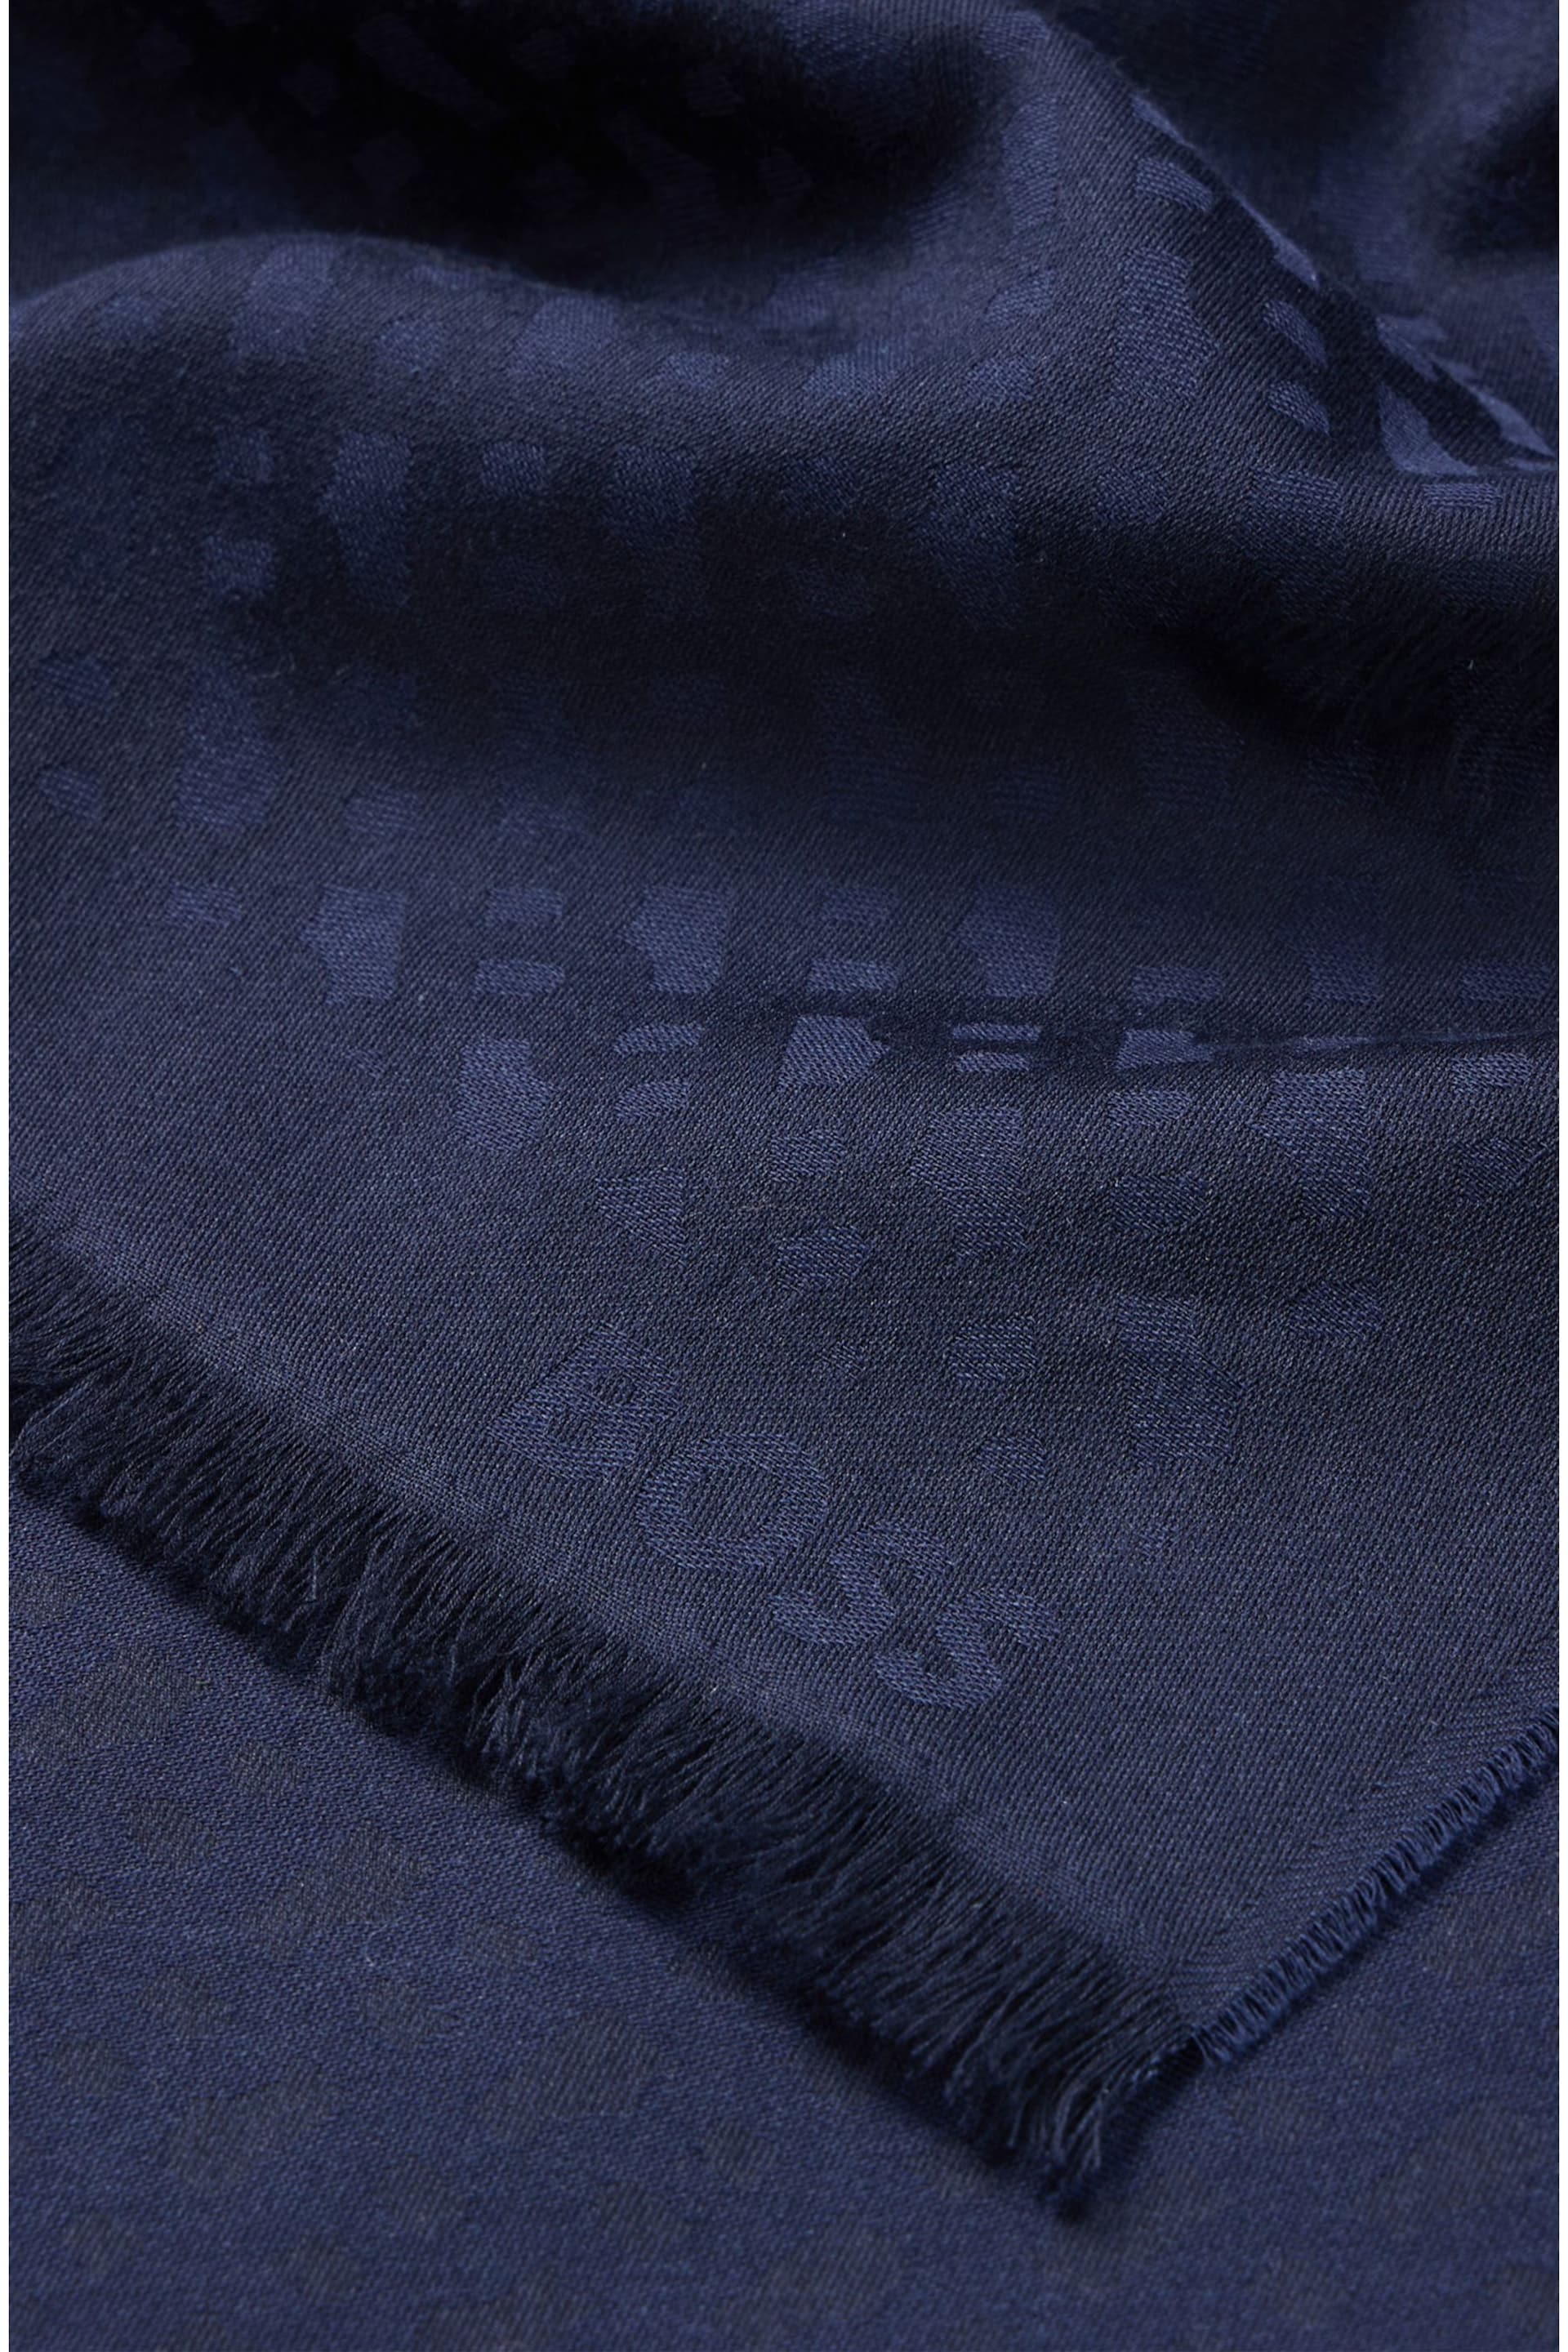 BOSS Blue Wool Blend Jaquard Woven Scarf - Image 2 of 2